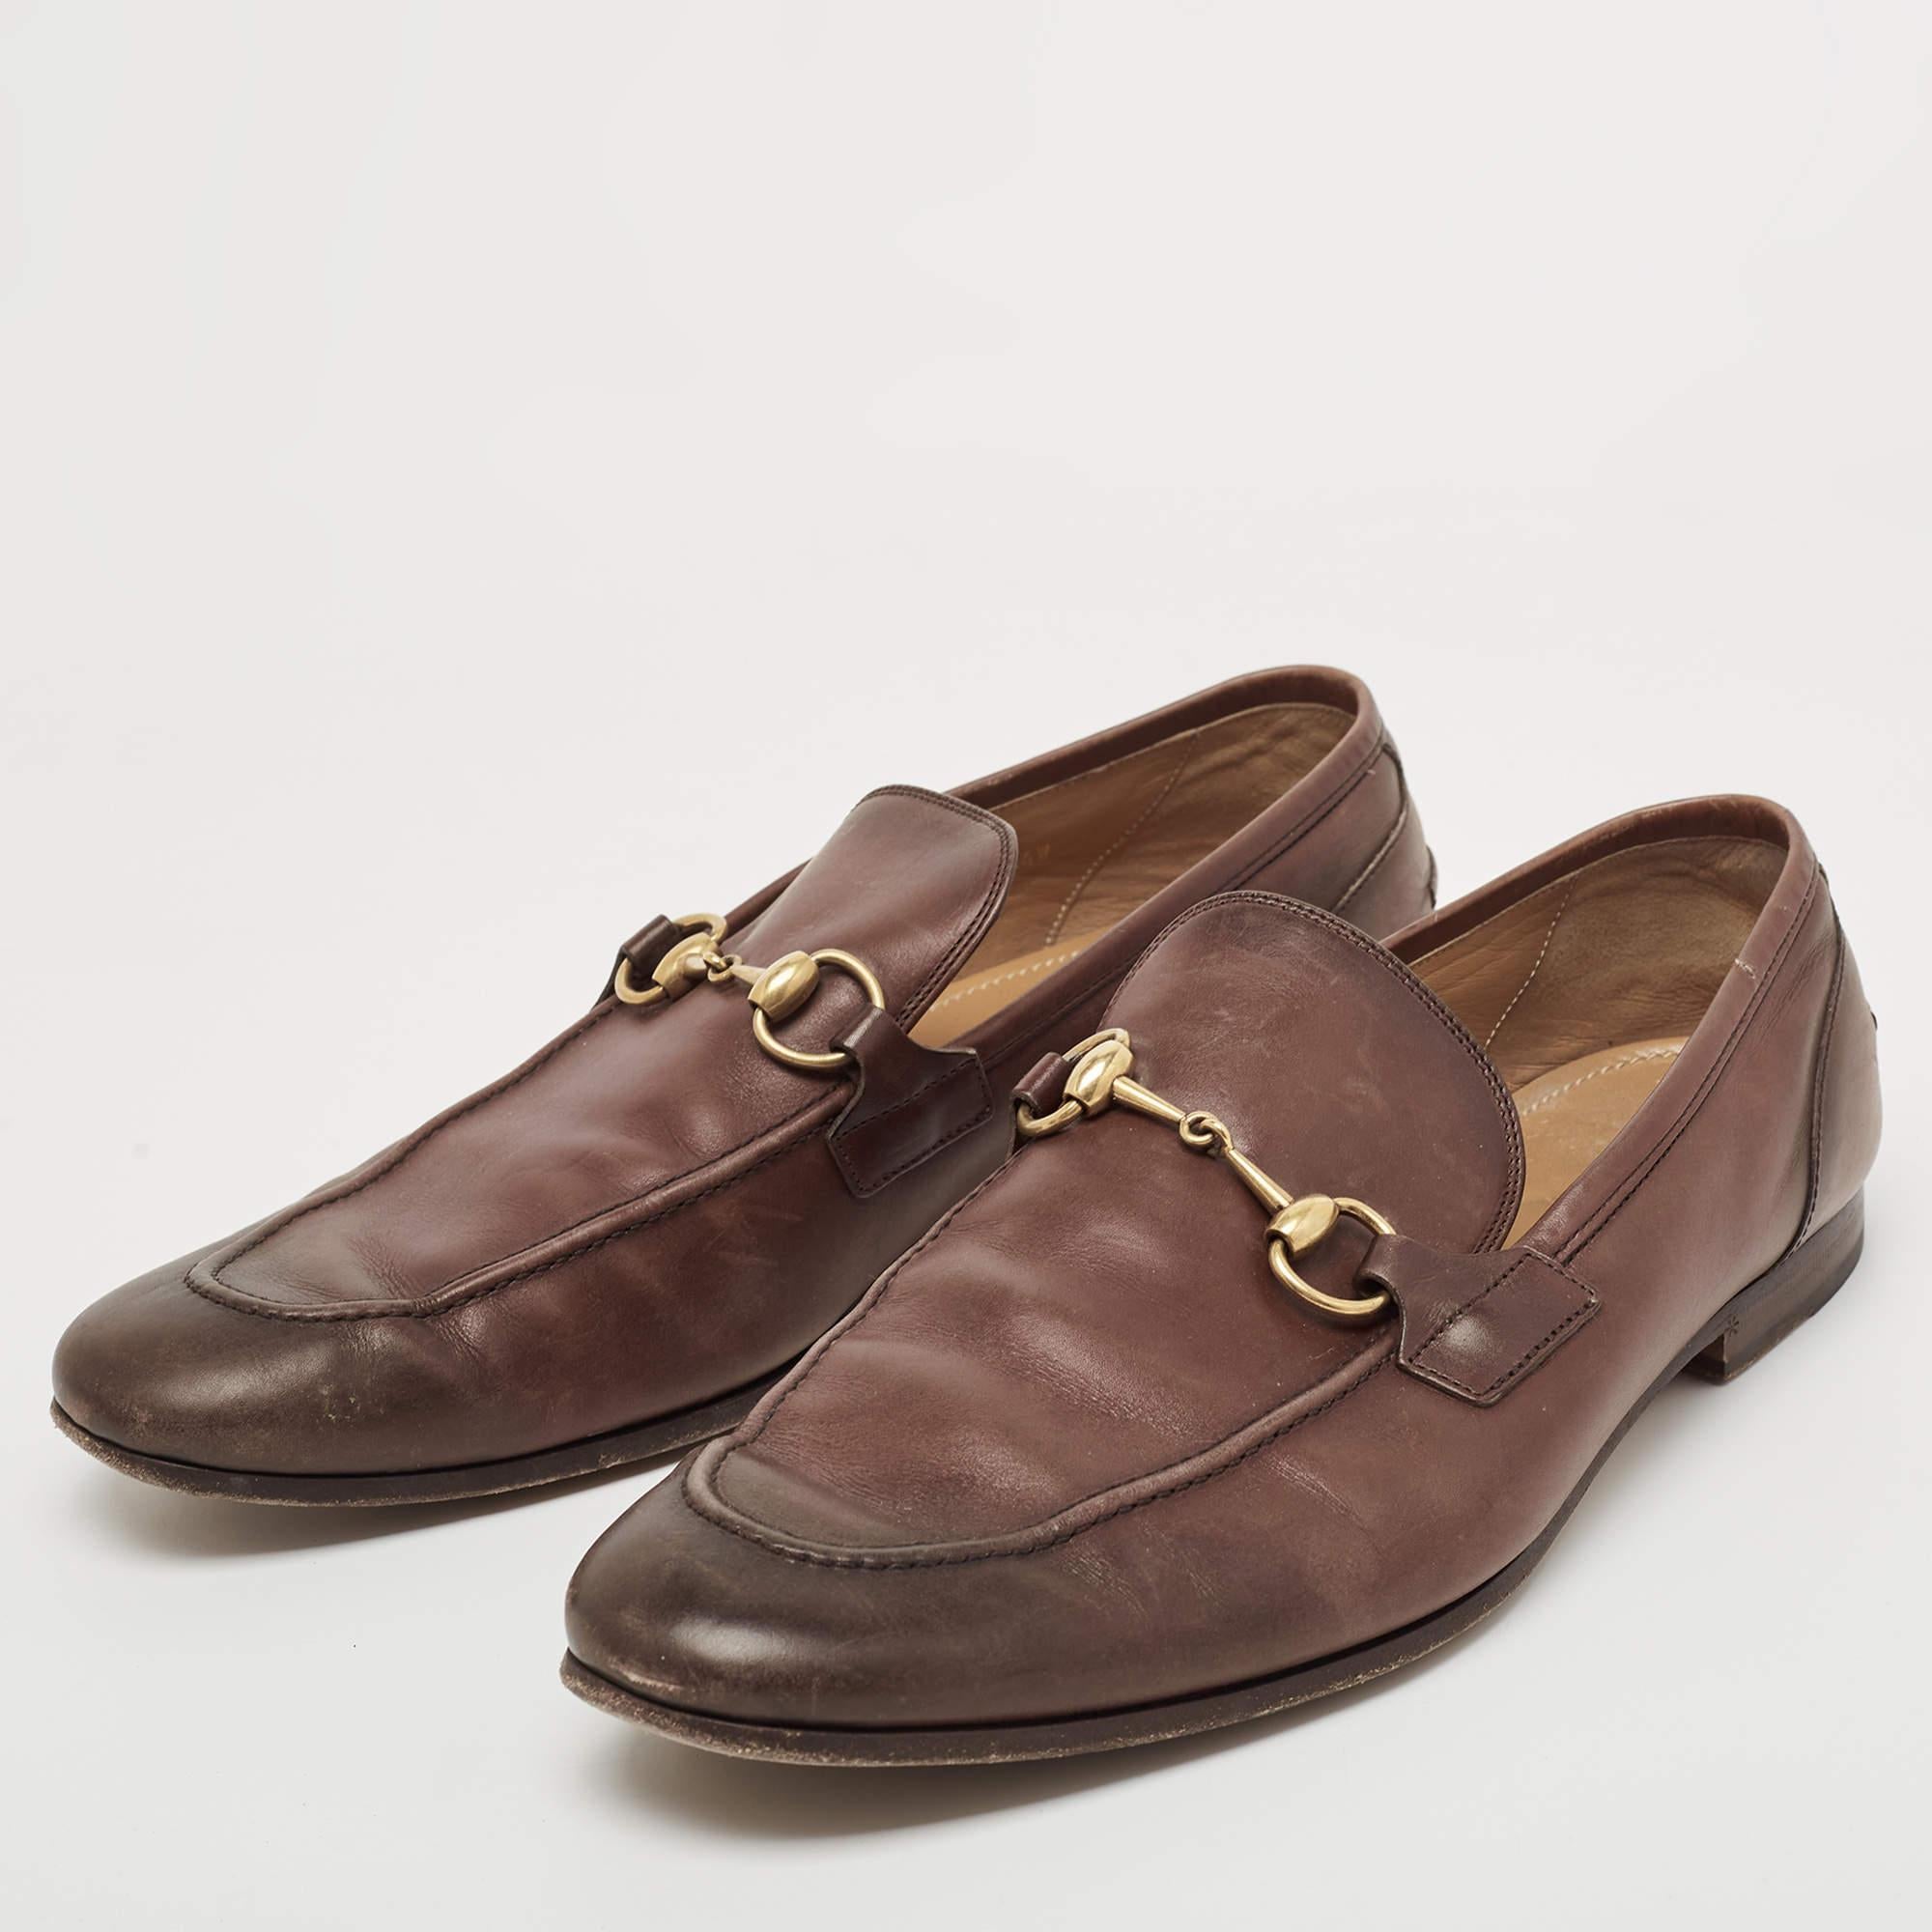 Let comfort and classic style be yours with these designer loafers. Crafted with skill, the high-quality shoes have the perfect construction to take you through the day with utmost ease.

